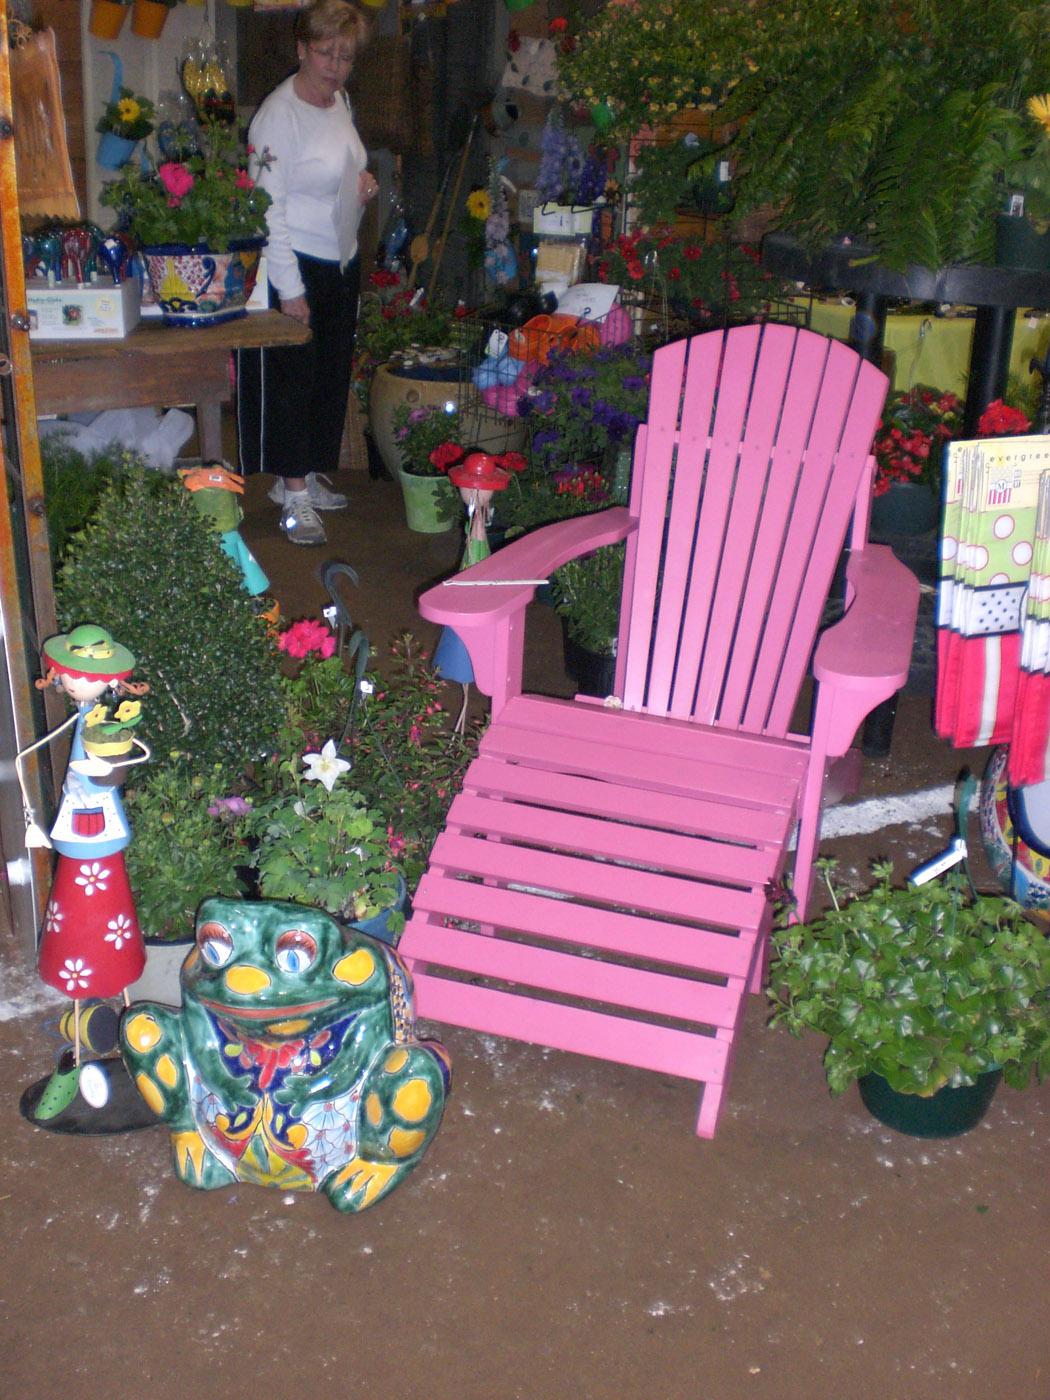 Much like the displays at the 2009 Everything Garden Expo near Starkville, visitors to the second annual event on March 6 and 7 will have the opportunity to see many unique items for the home garden. (Photo compliments of MSU Ag Communications)